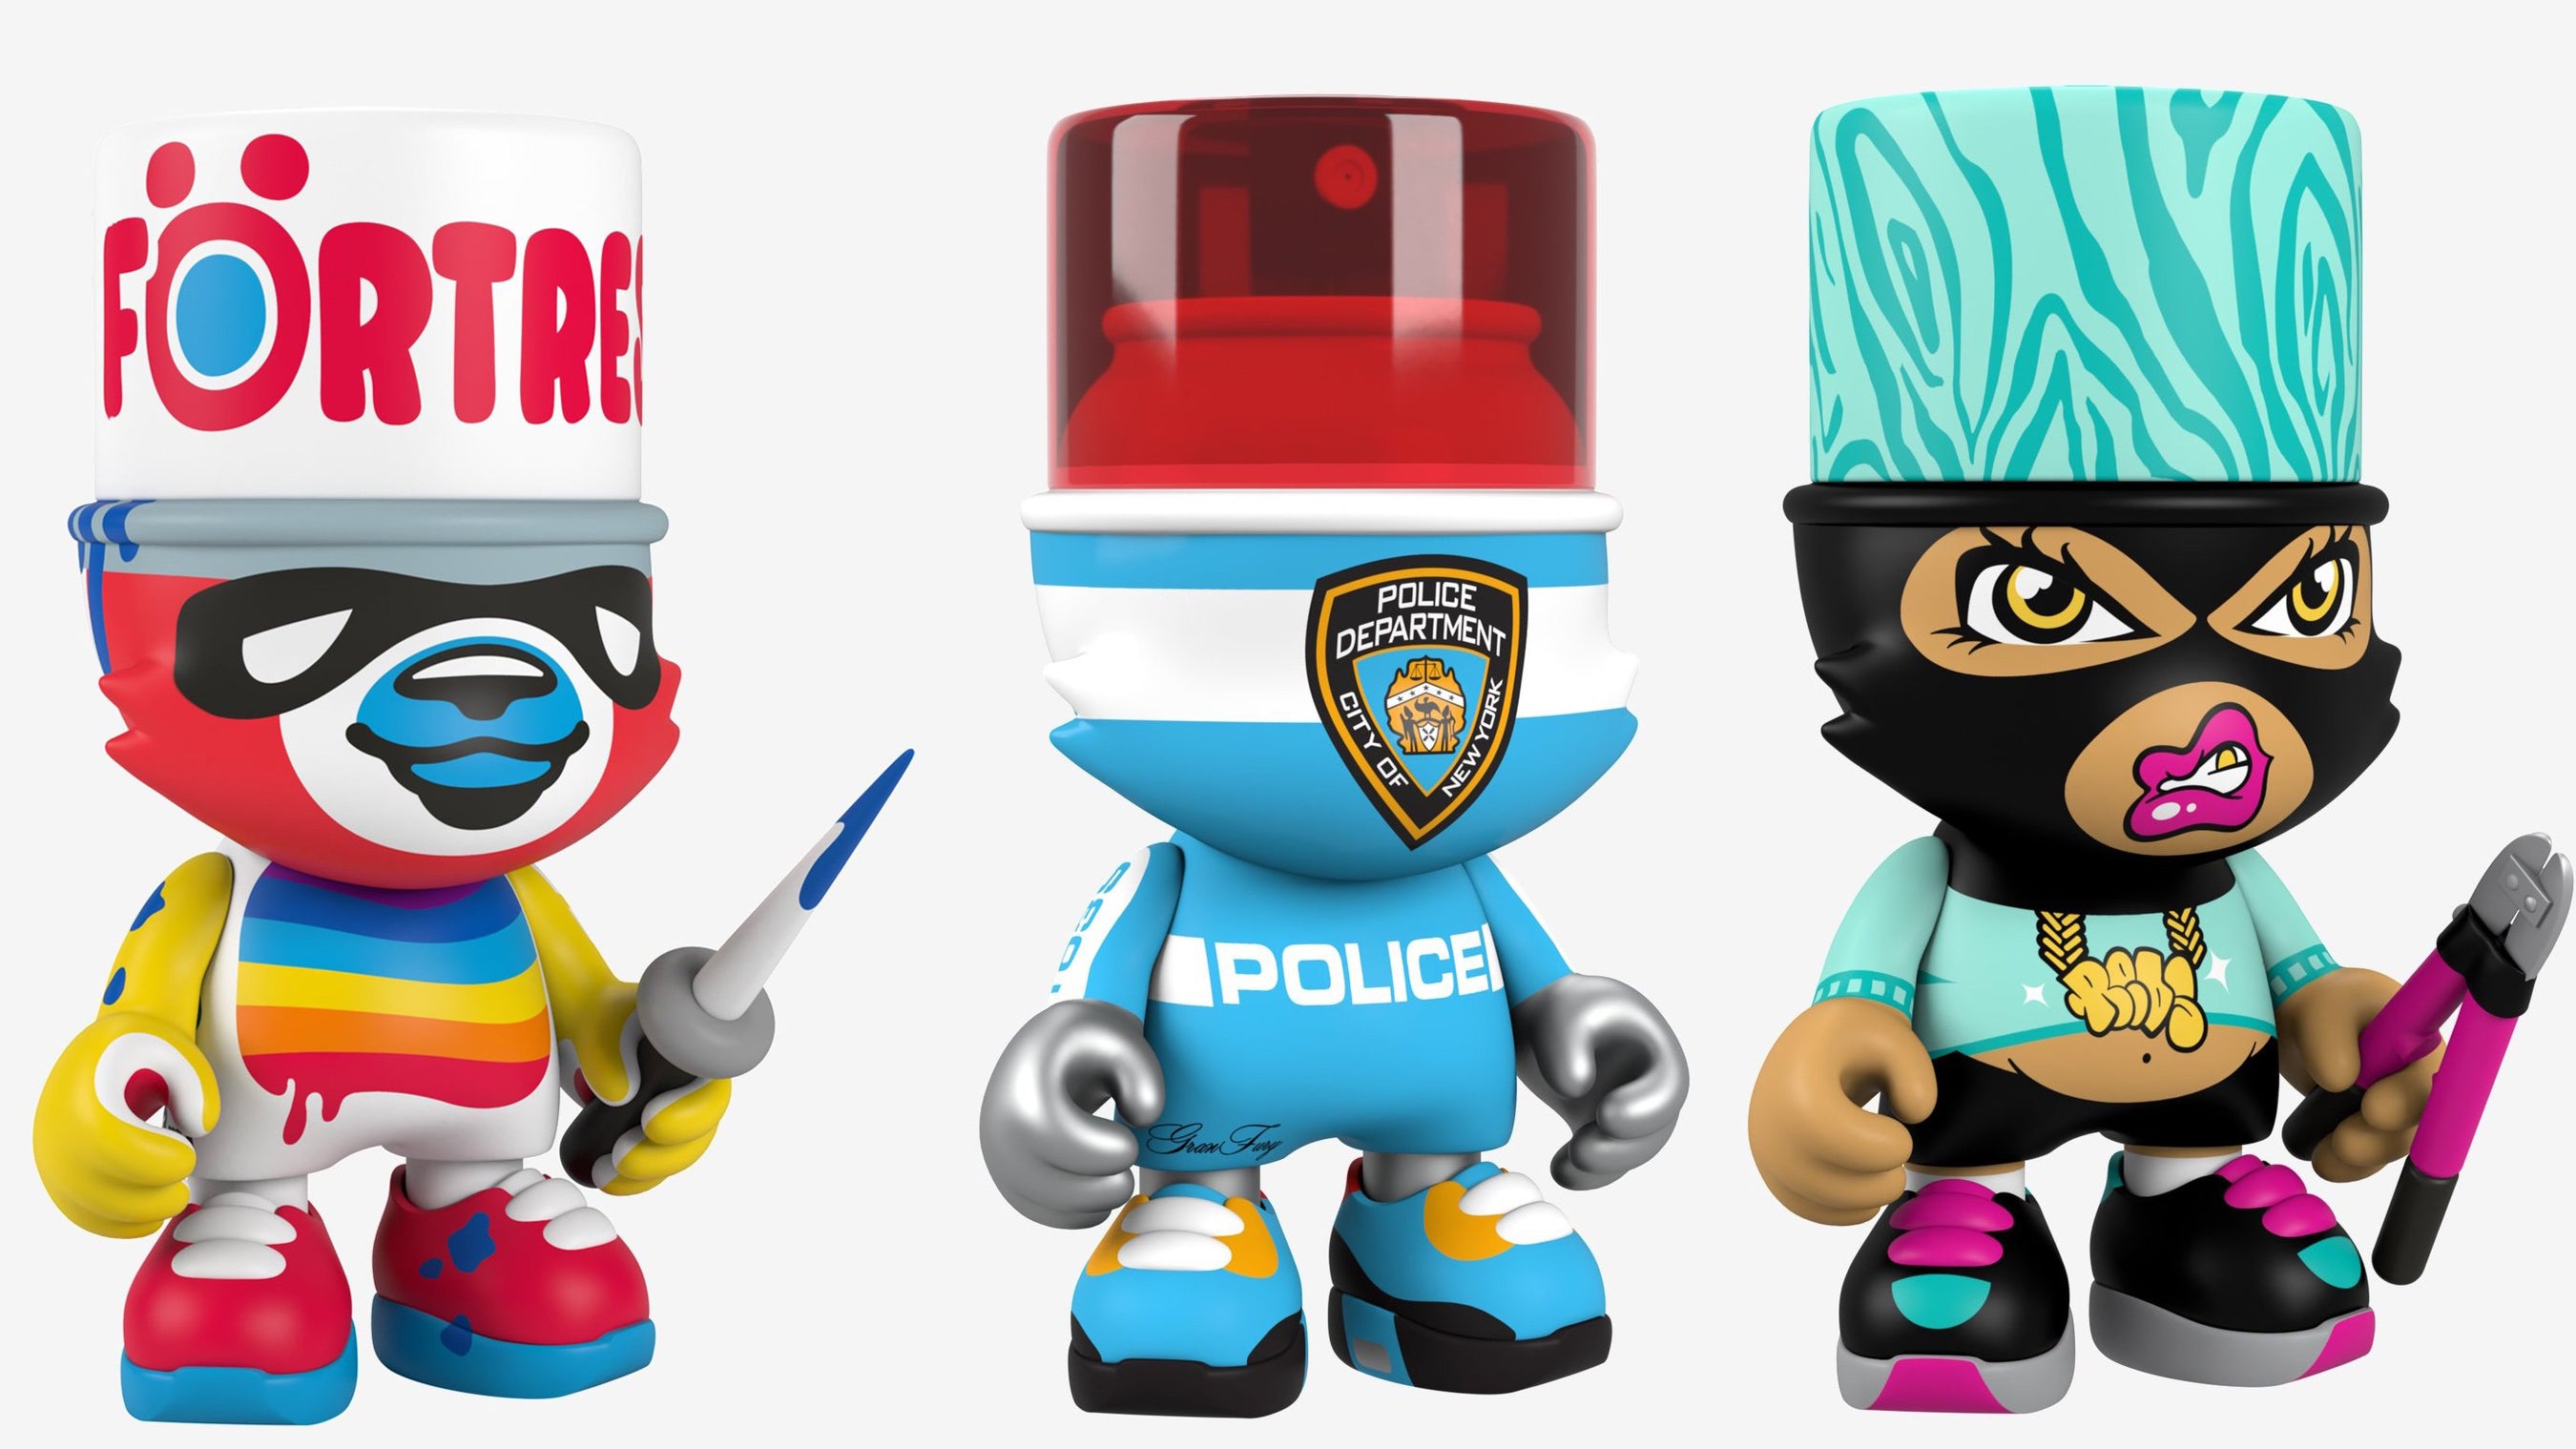 Kranky Blind Box Series One featuring cartoon toys and characters by various artists.